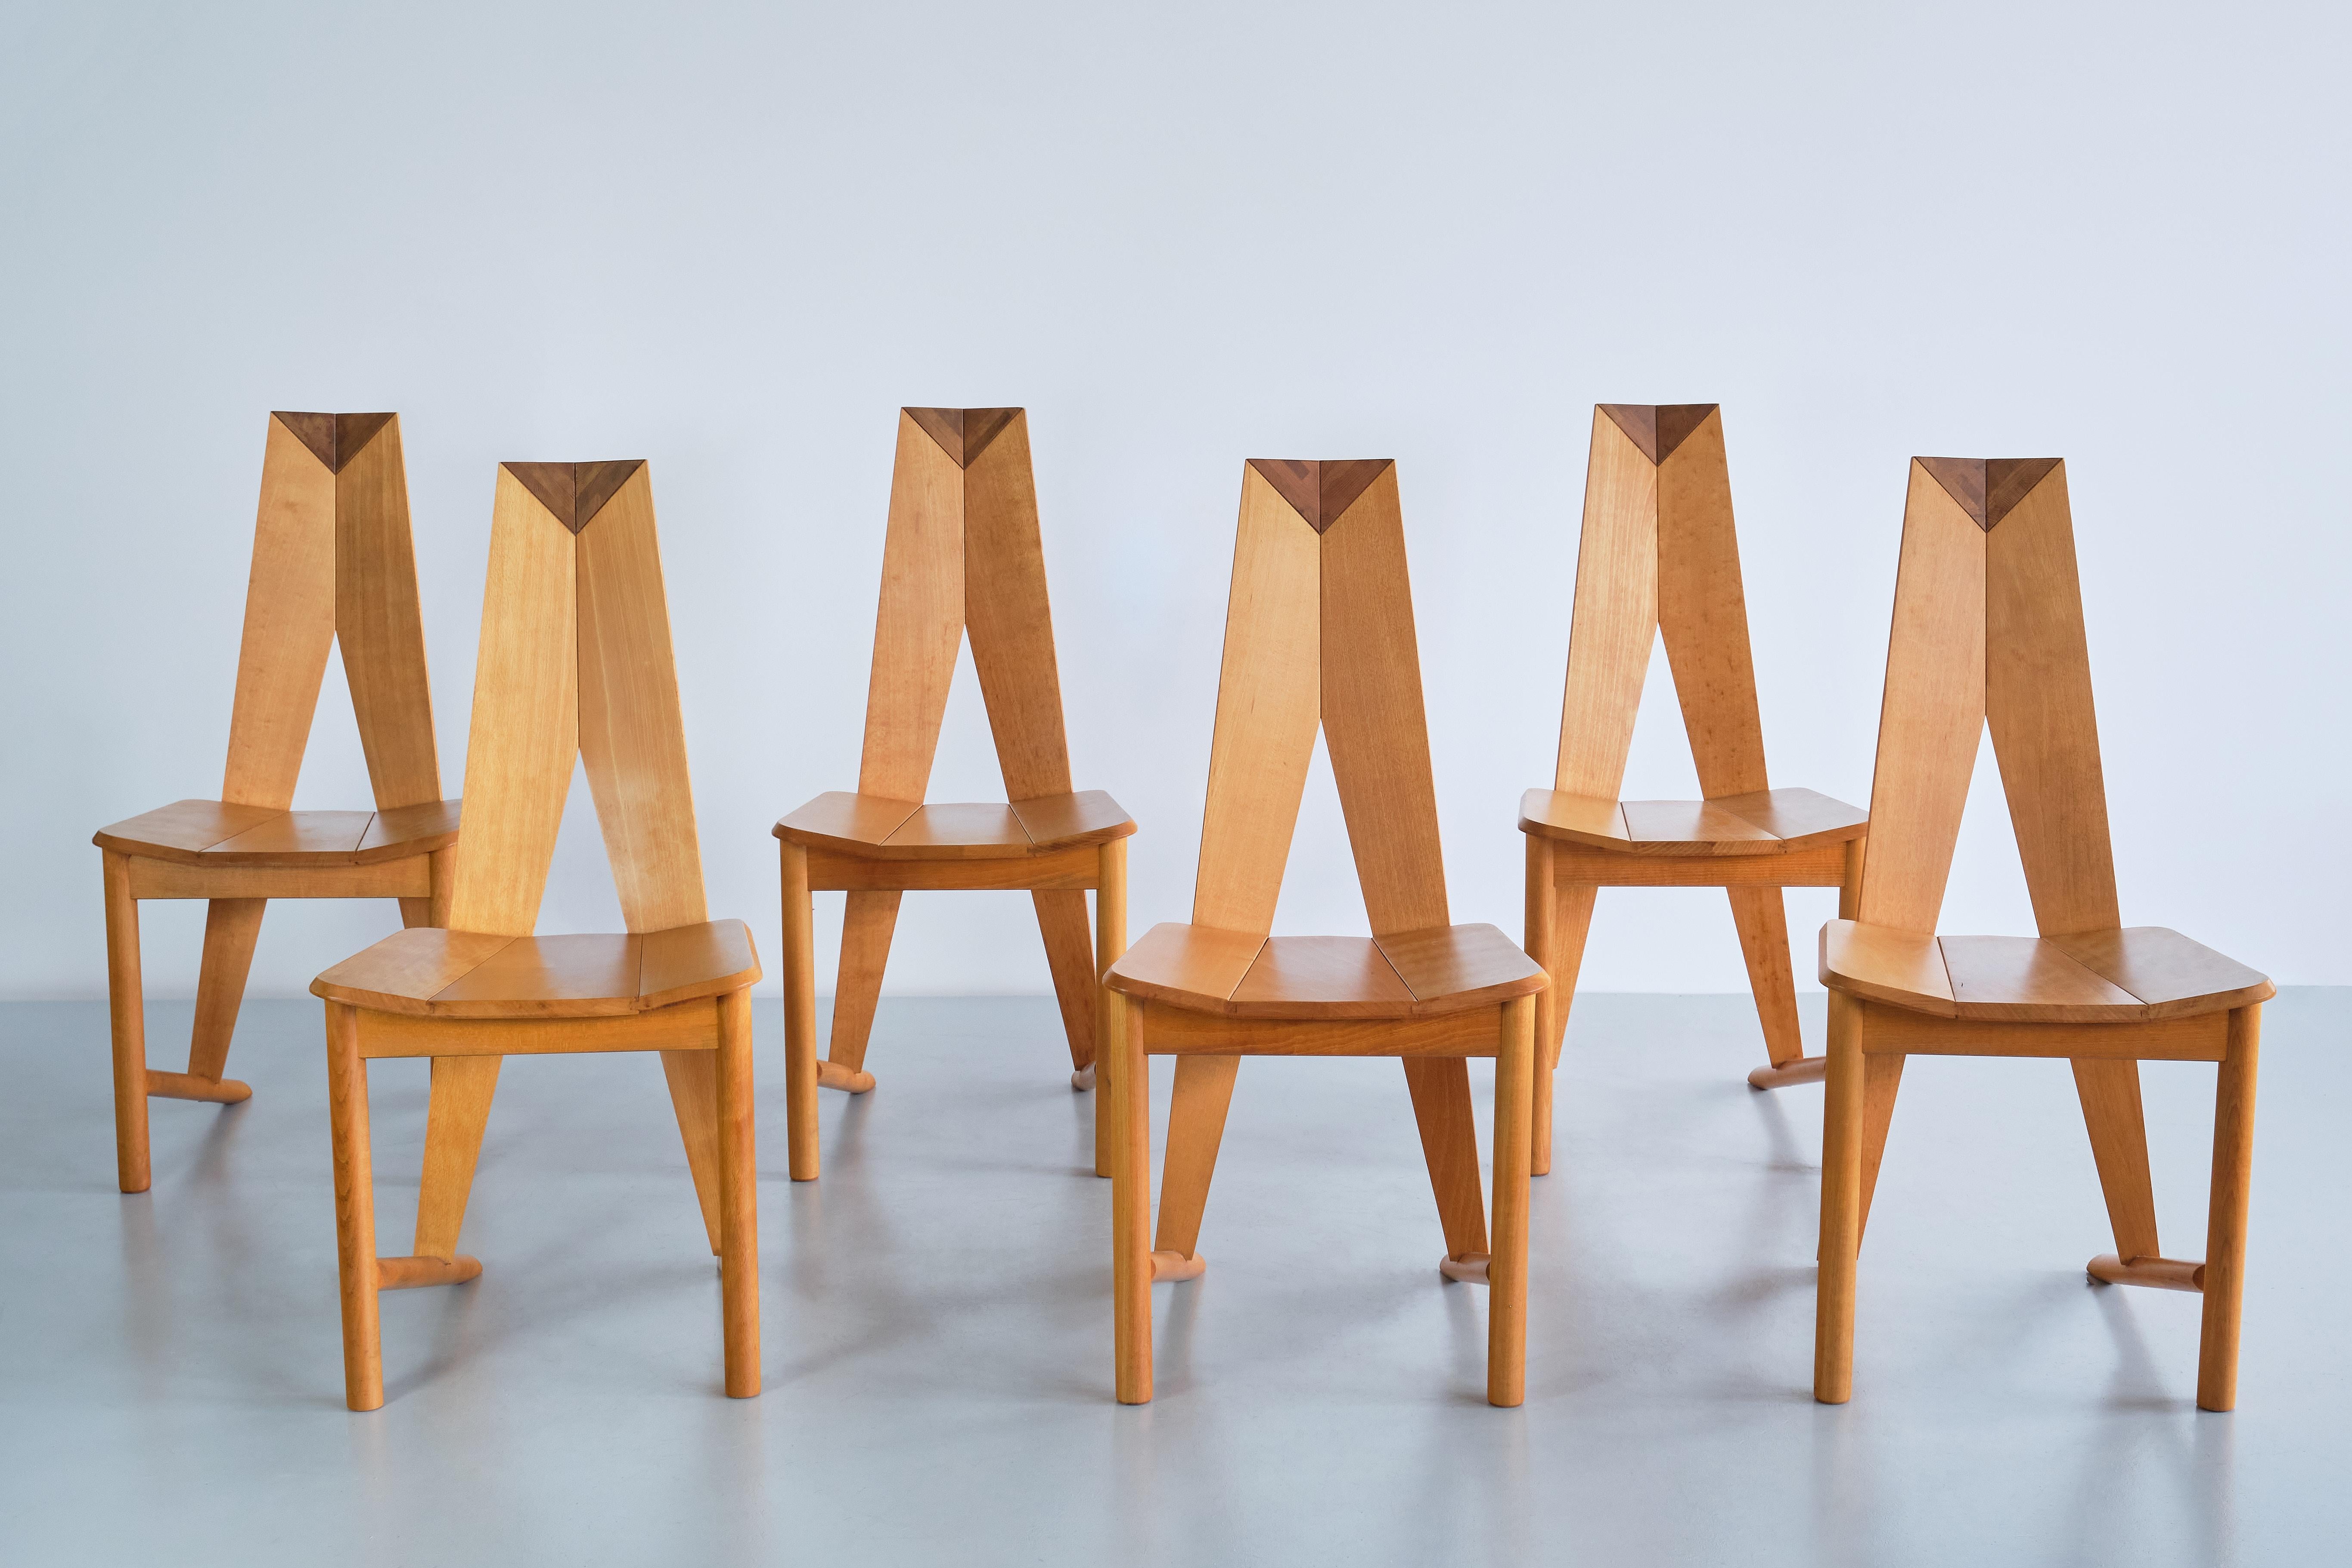 This rare set of six dining chairs was designed by the Danish designers Søren Nissen and Ebbe Gehl. The chairs were produced by the French manufacturer Ebénisterie Seltz for only a short period of time in the 1980s. 

This particular model was